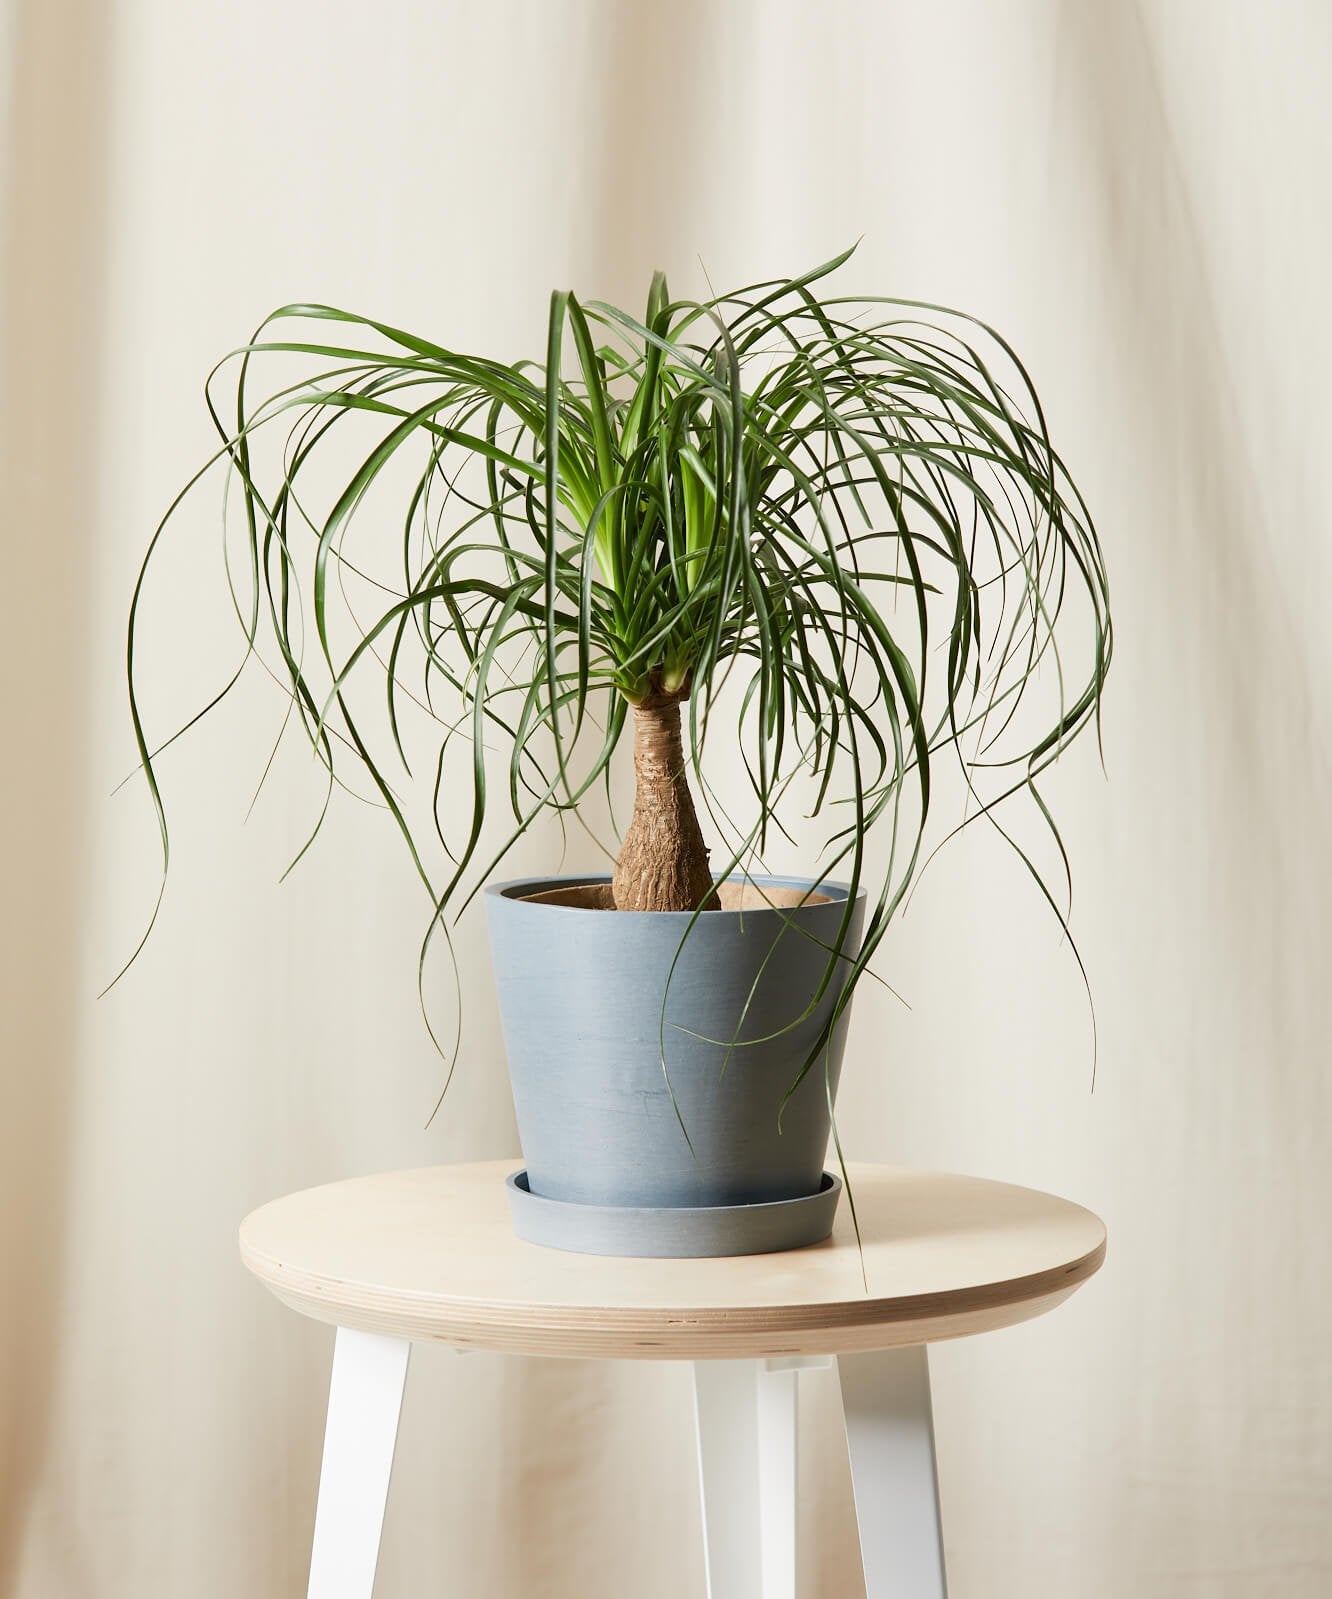 So You Want To Be A Plant Mom: 11 Things To Know Before Buying Your First Houseplant Baby